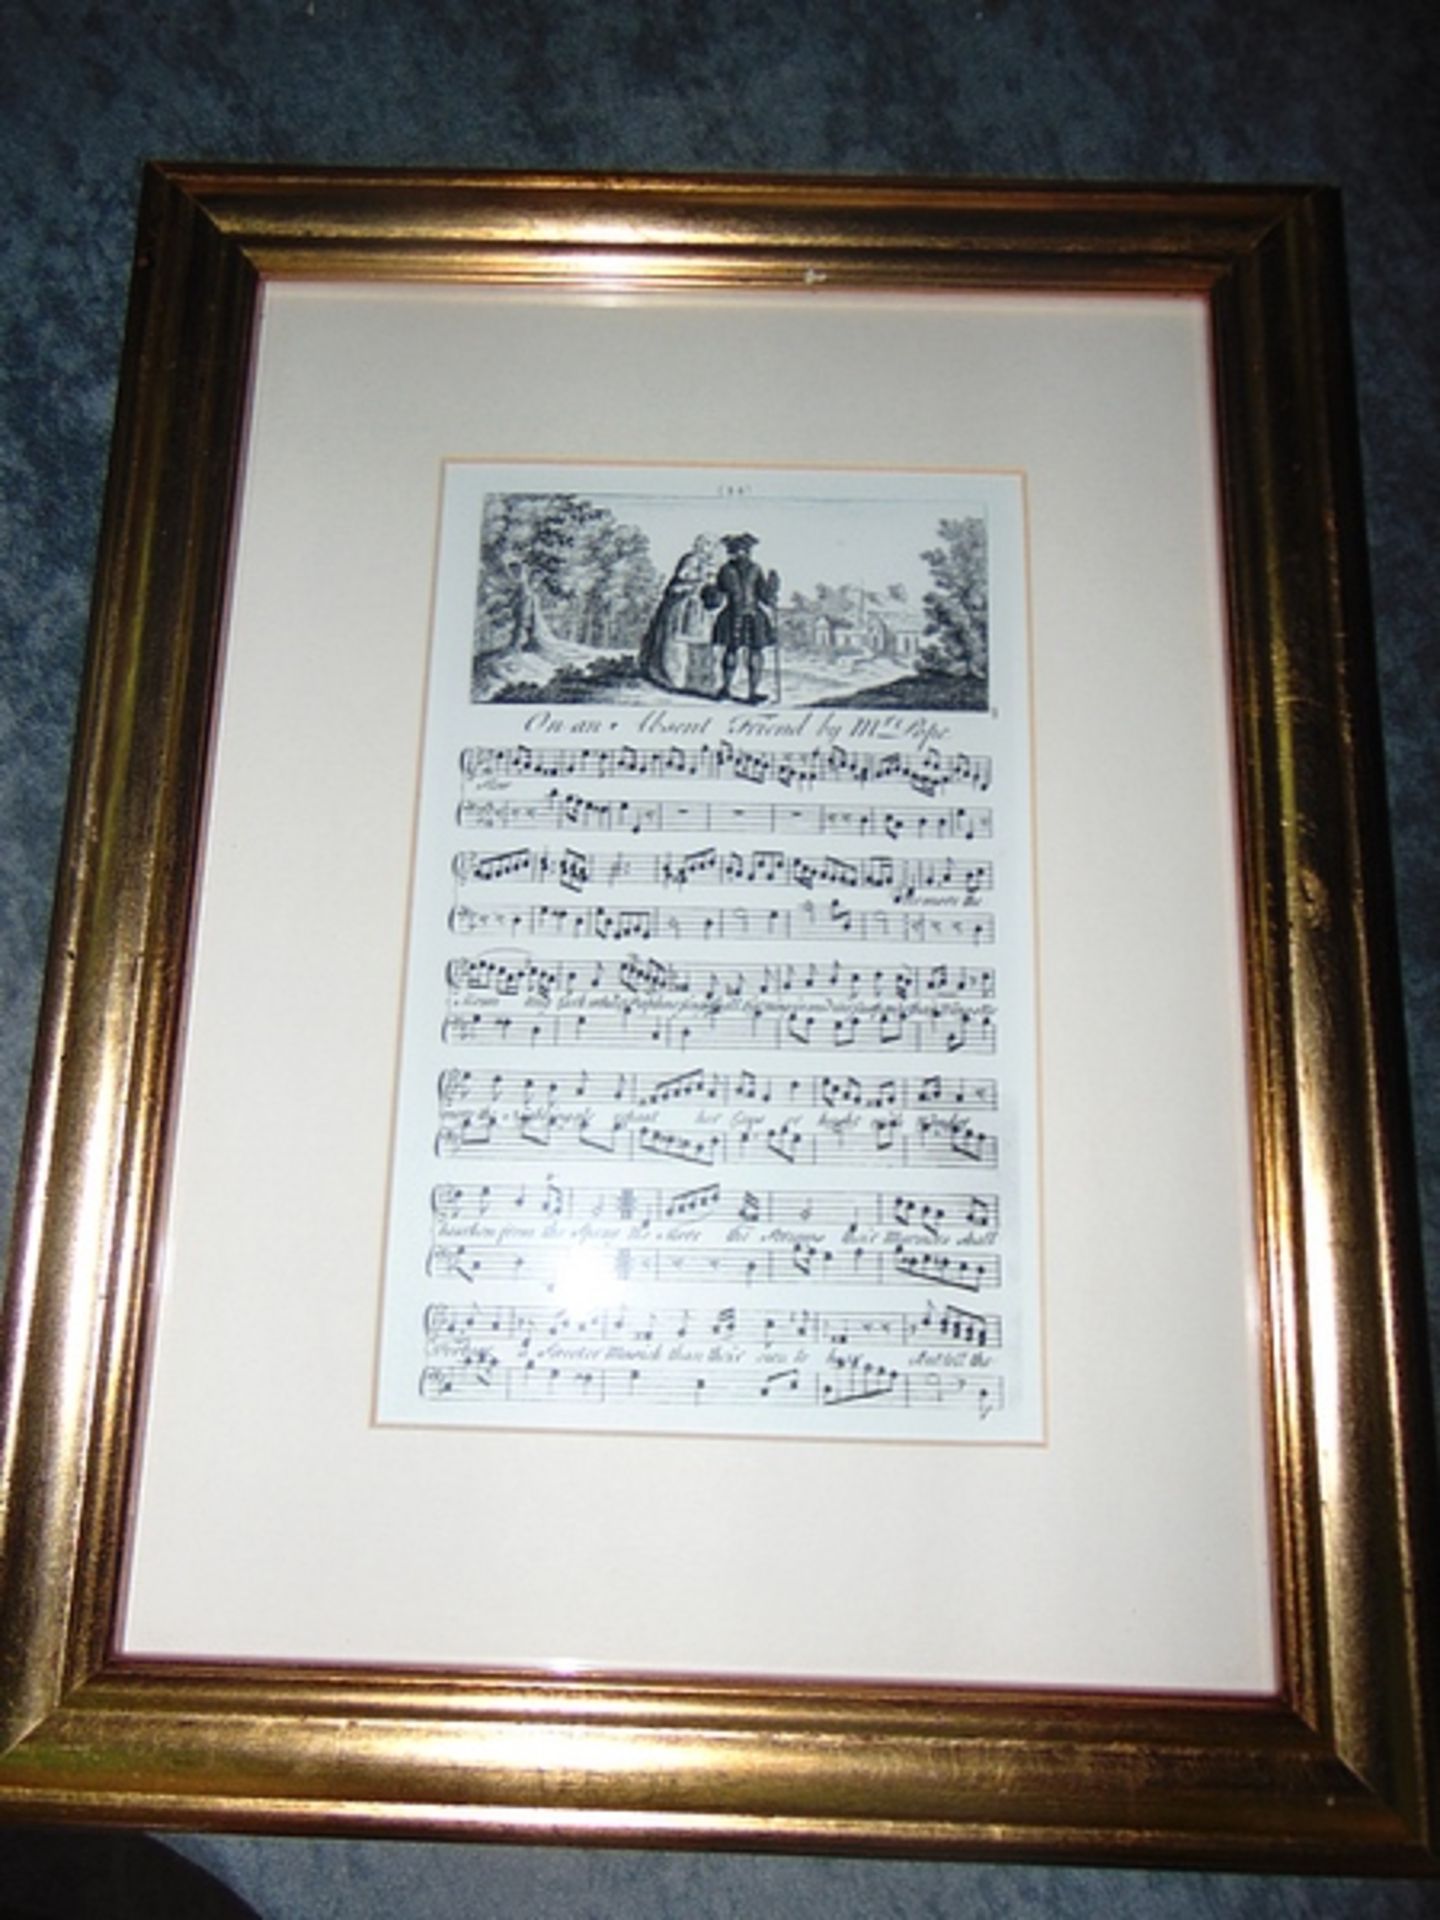 A set of 2 musical scores Damon Sung by Wife Thomas and Friends by Mr Pipe military music and